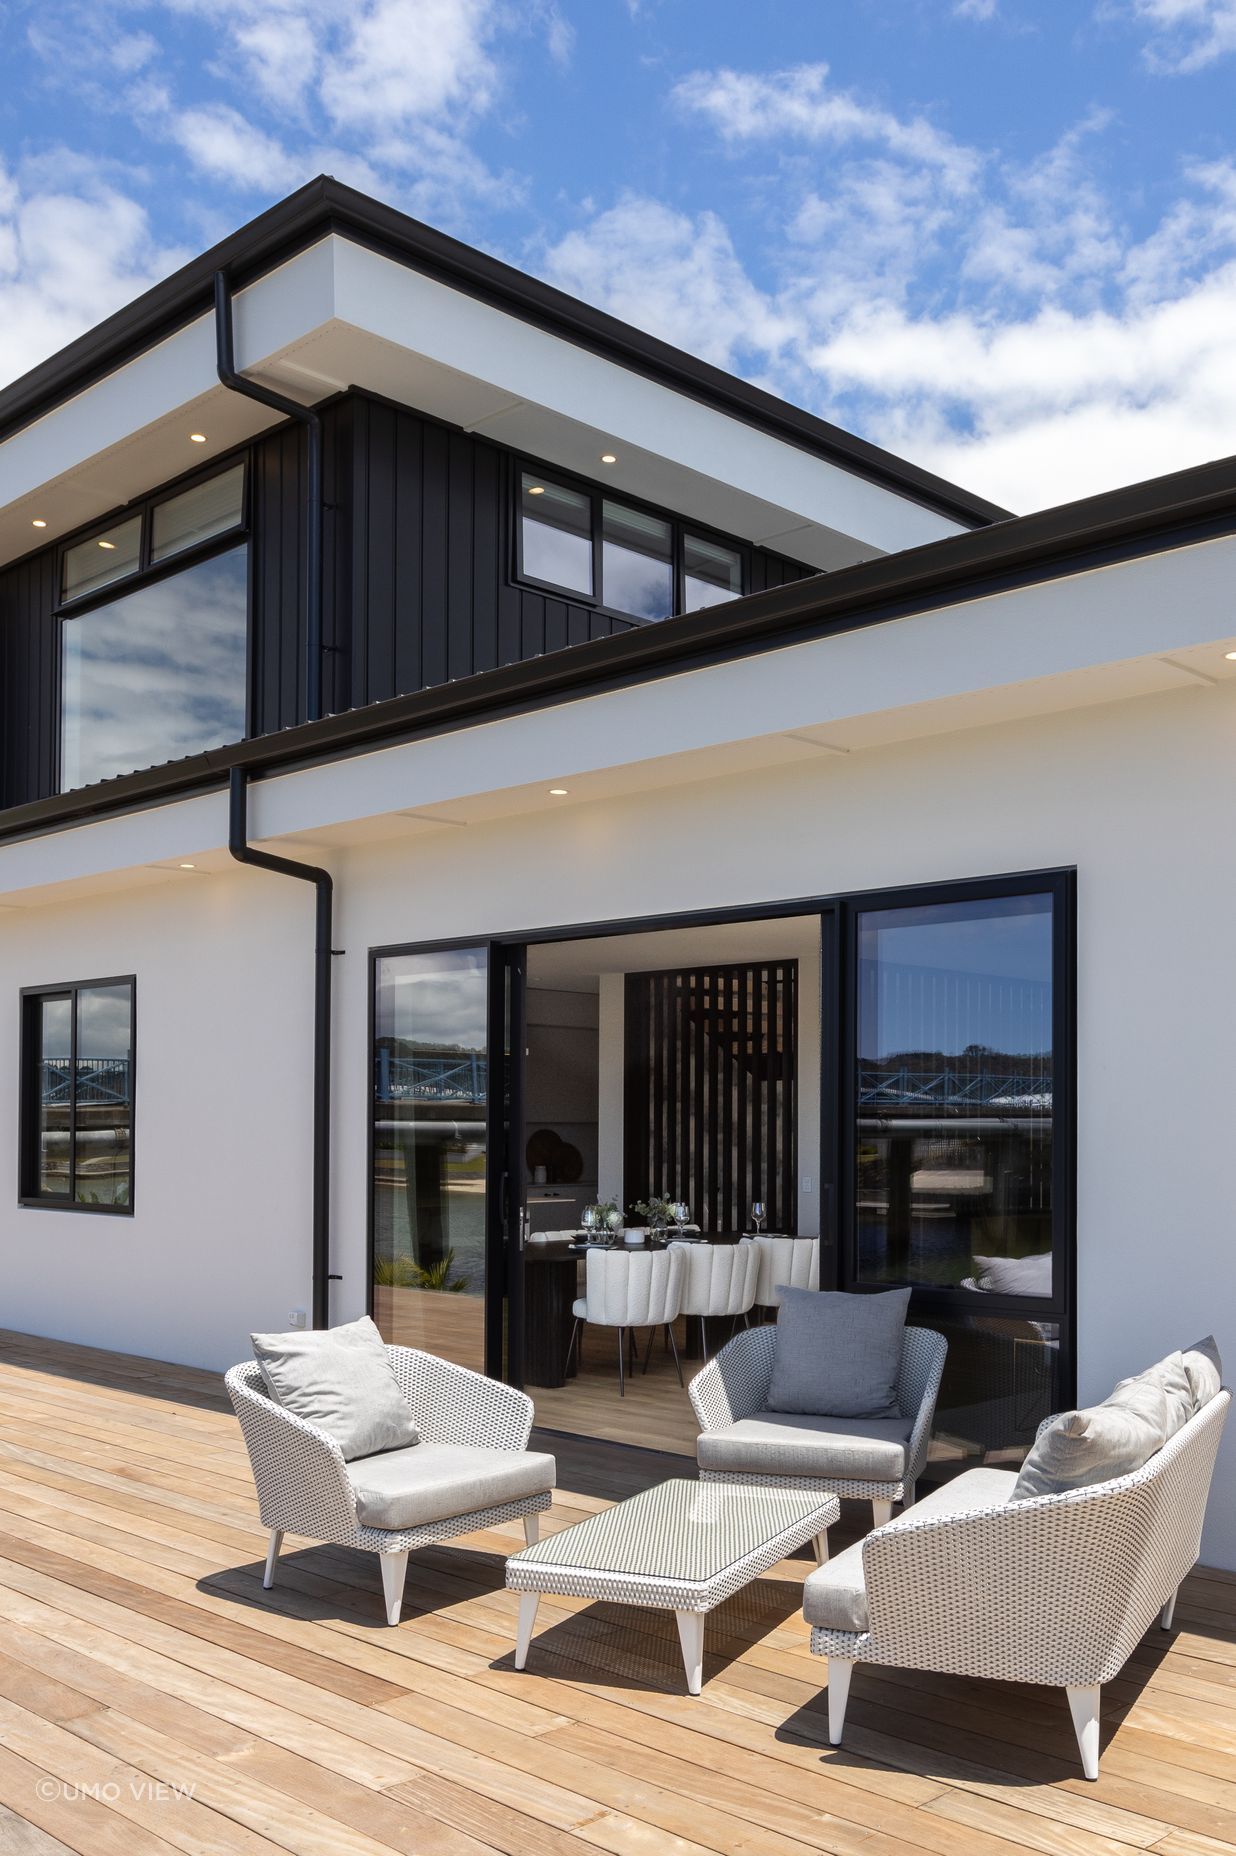 The deck wraps around two sides of the home, offering many spaces for relaxation and entertainment.